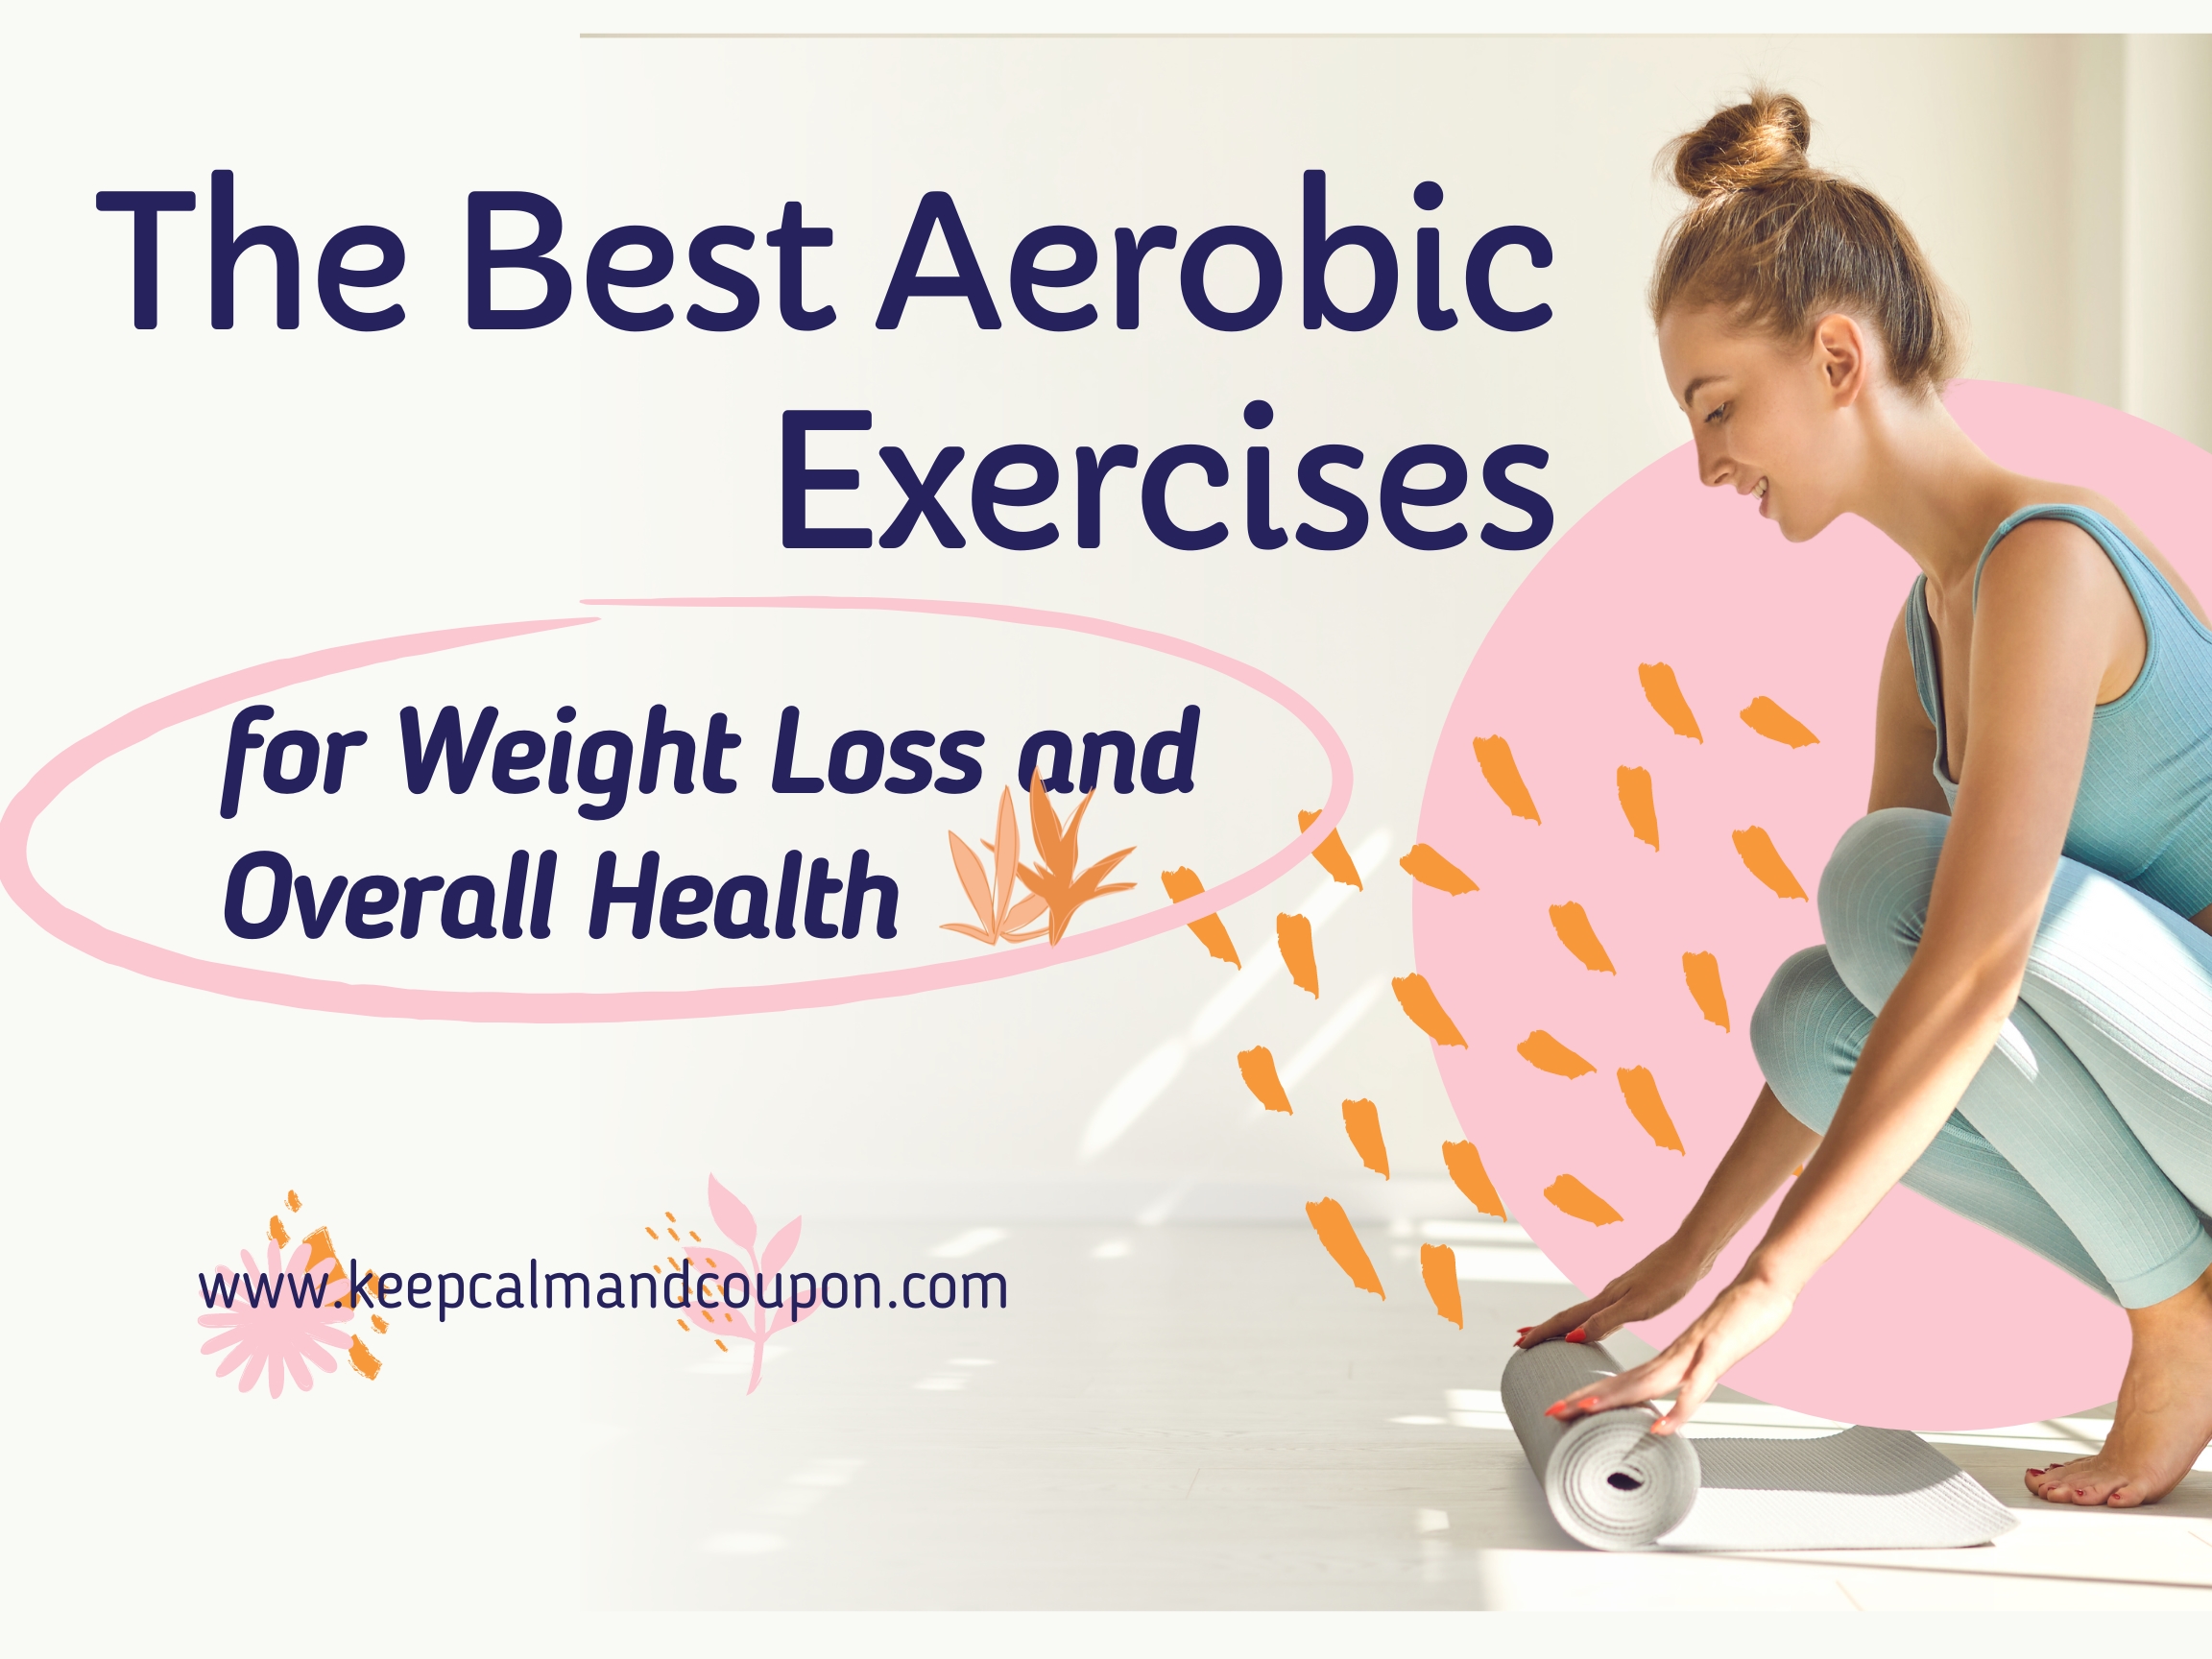 The Best Aerobic Exercises for Weight Loss and Overall Health